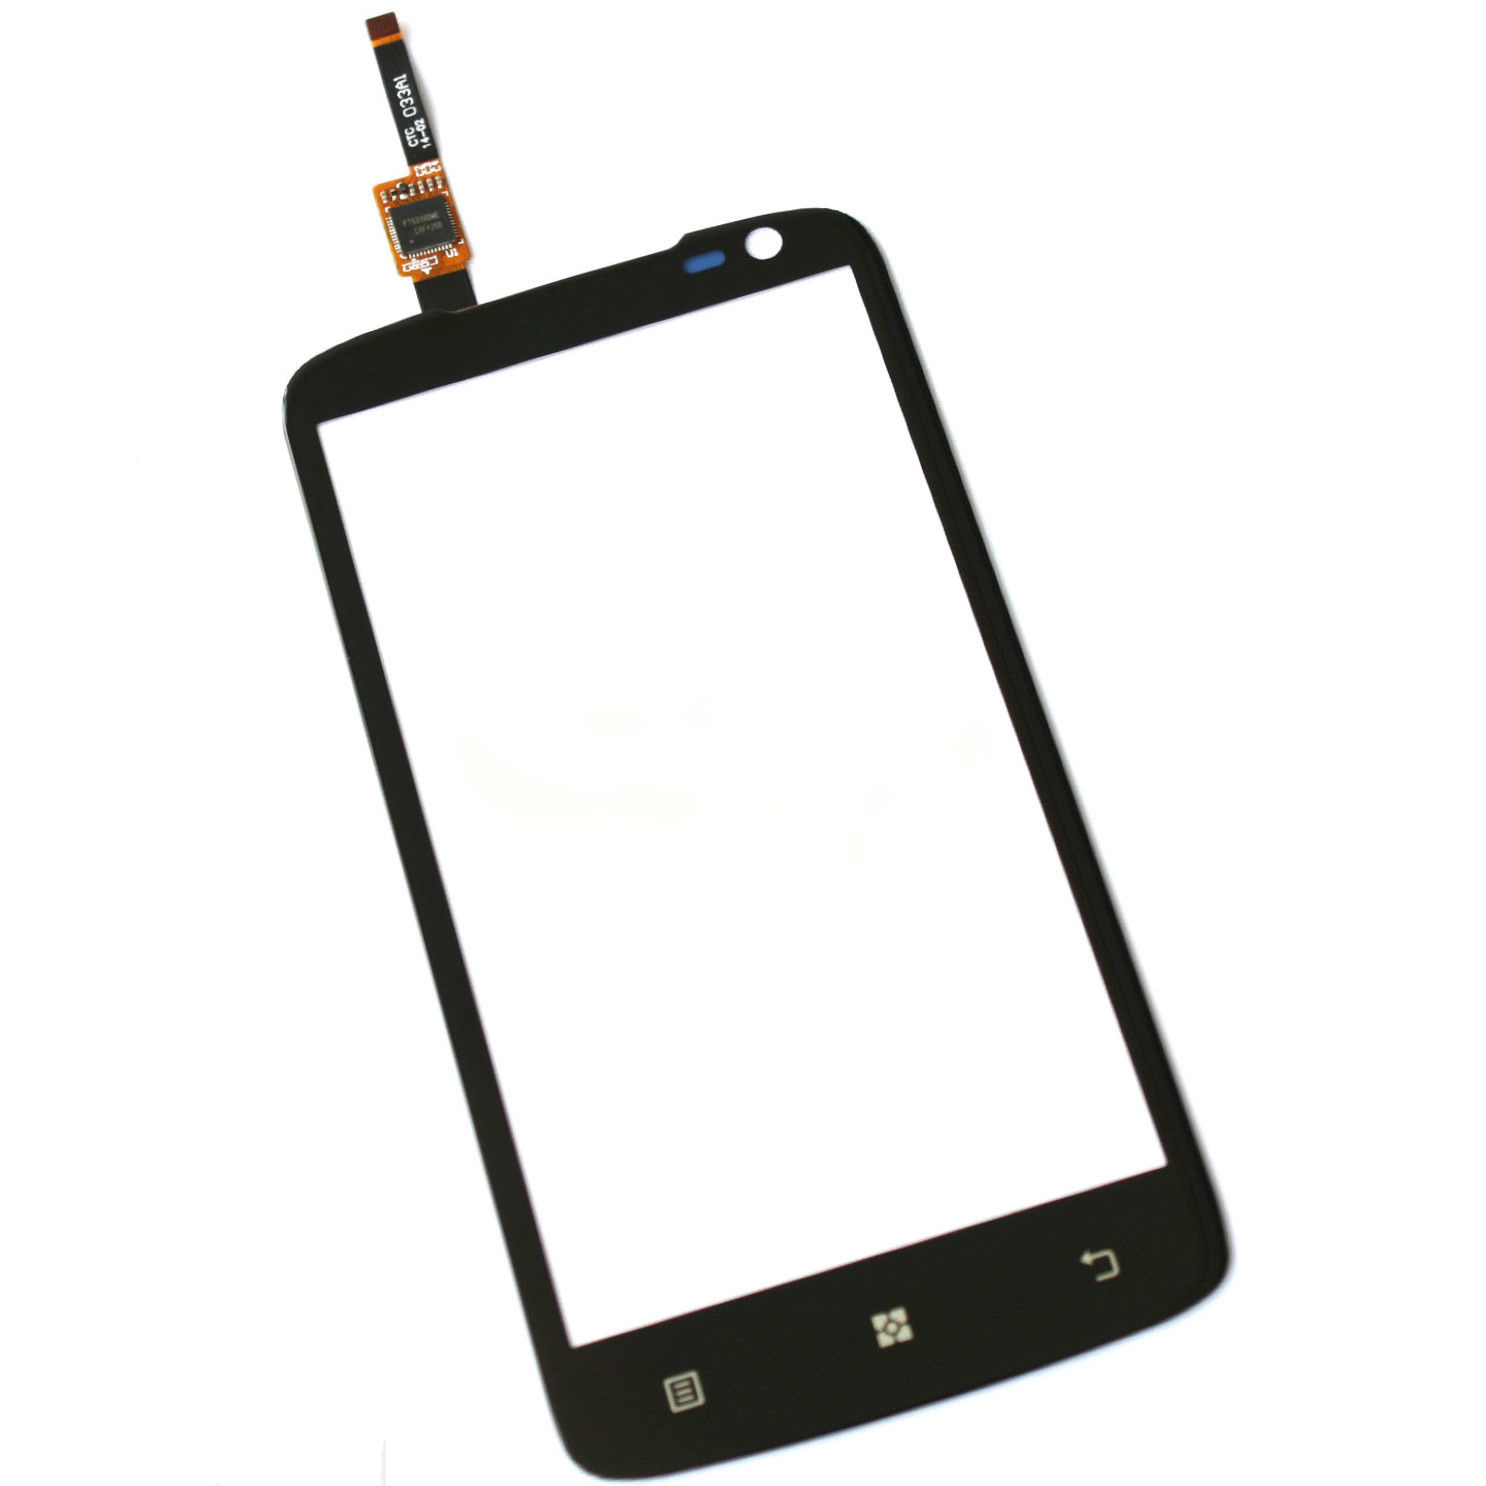 New Black 4 7 inch Touch Screen Digitizer Replacement For Lenovo S820 Mobile Phone Parts 